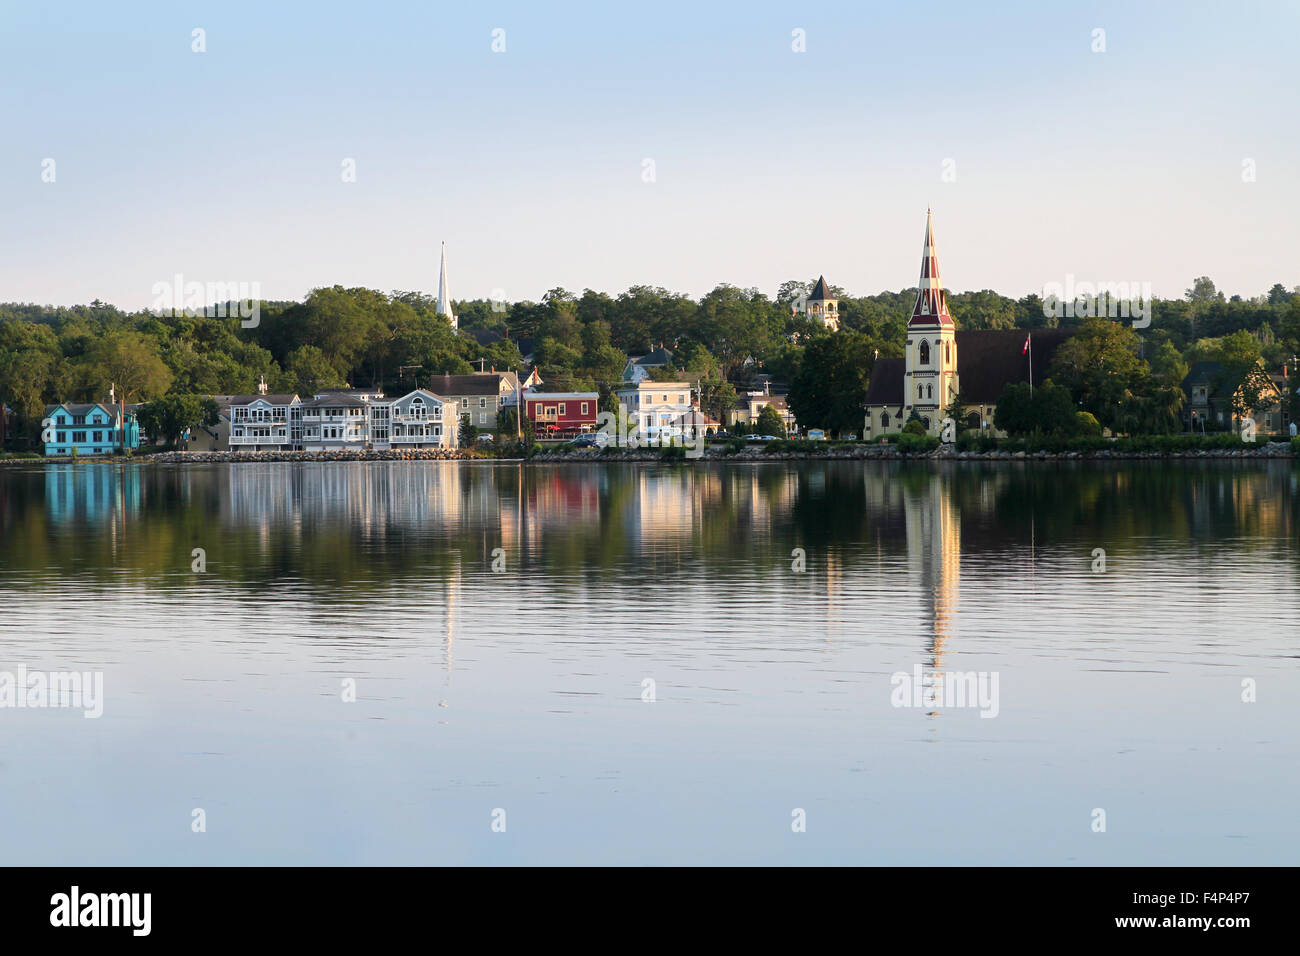 Mahone Bay, Nova Scotia, Canada, a small rural coastal town showing it's church spires and reflections along the water Stock Photo